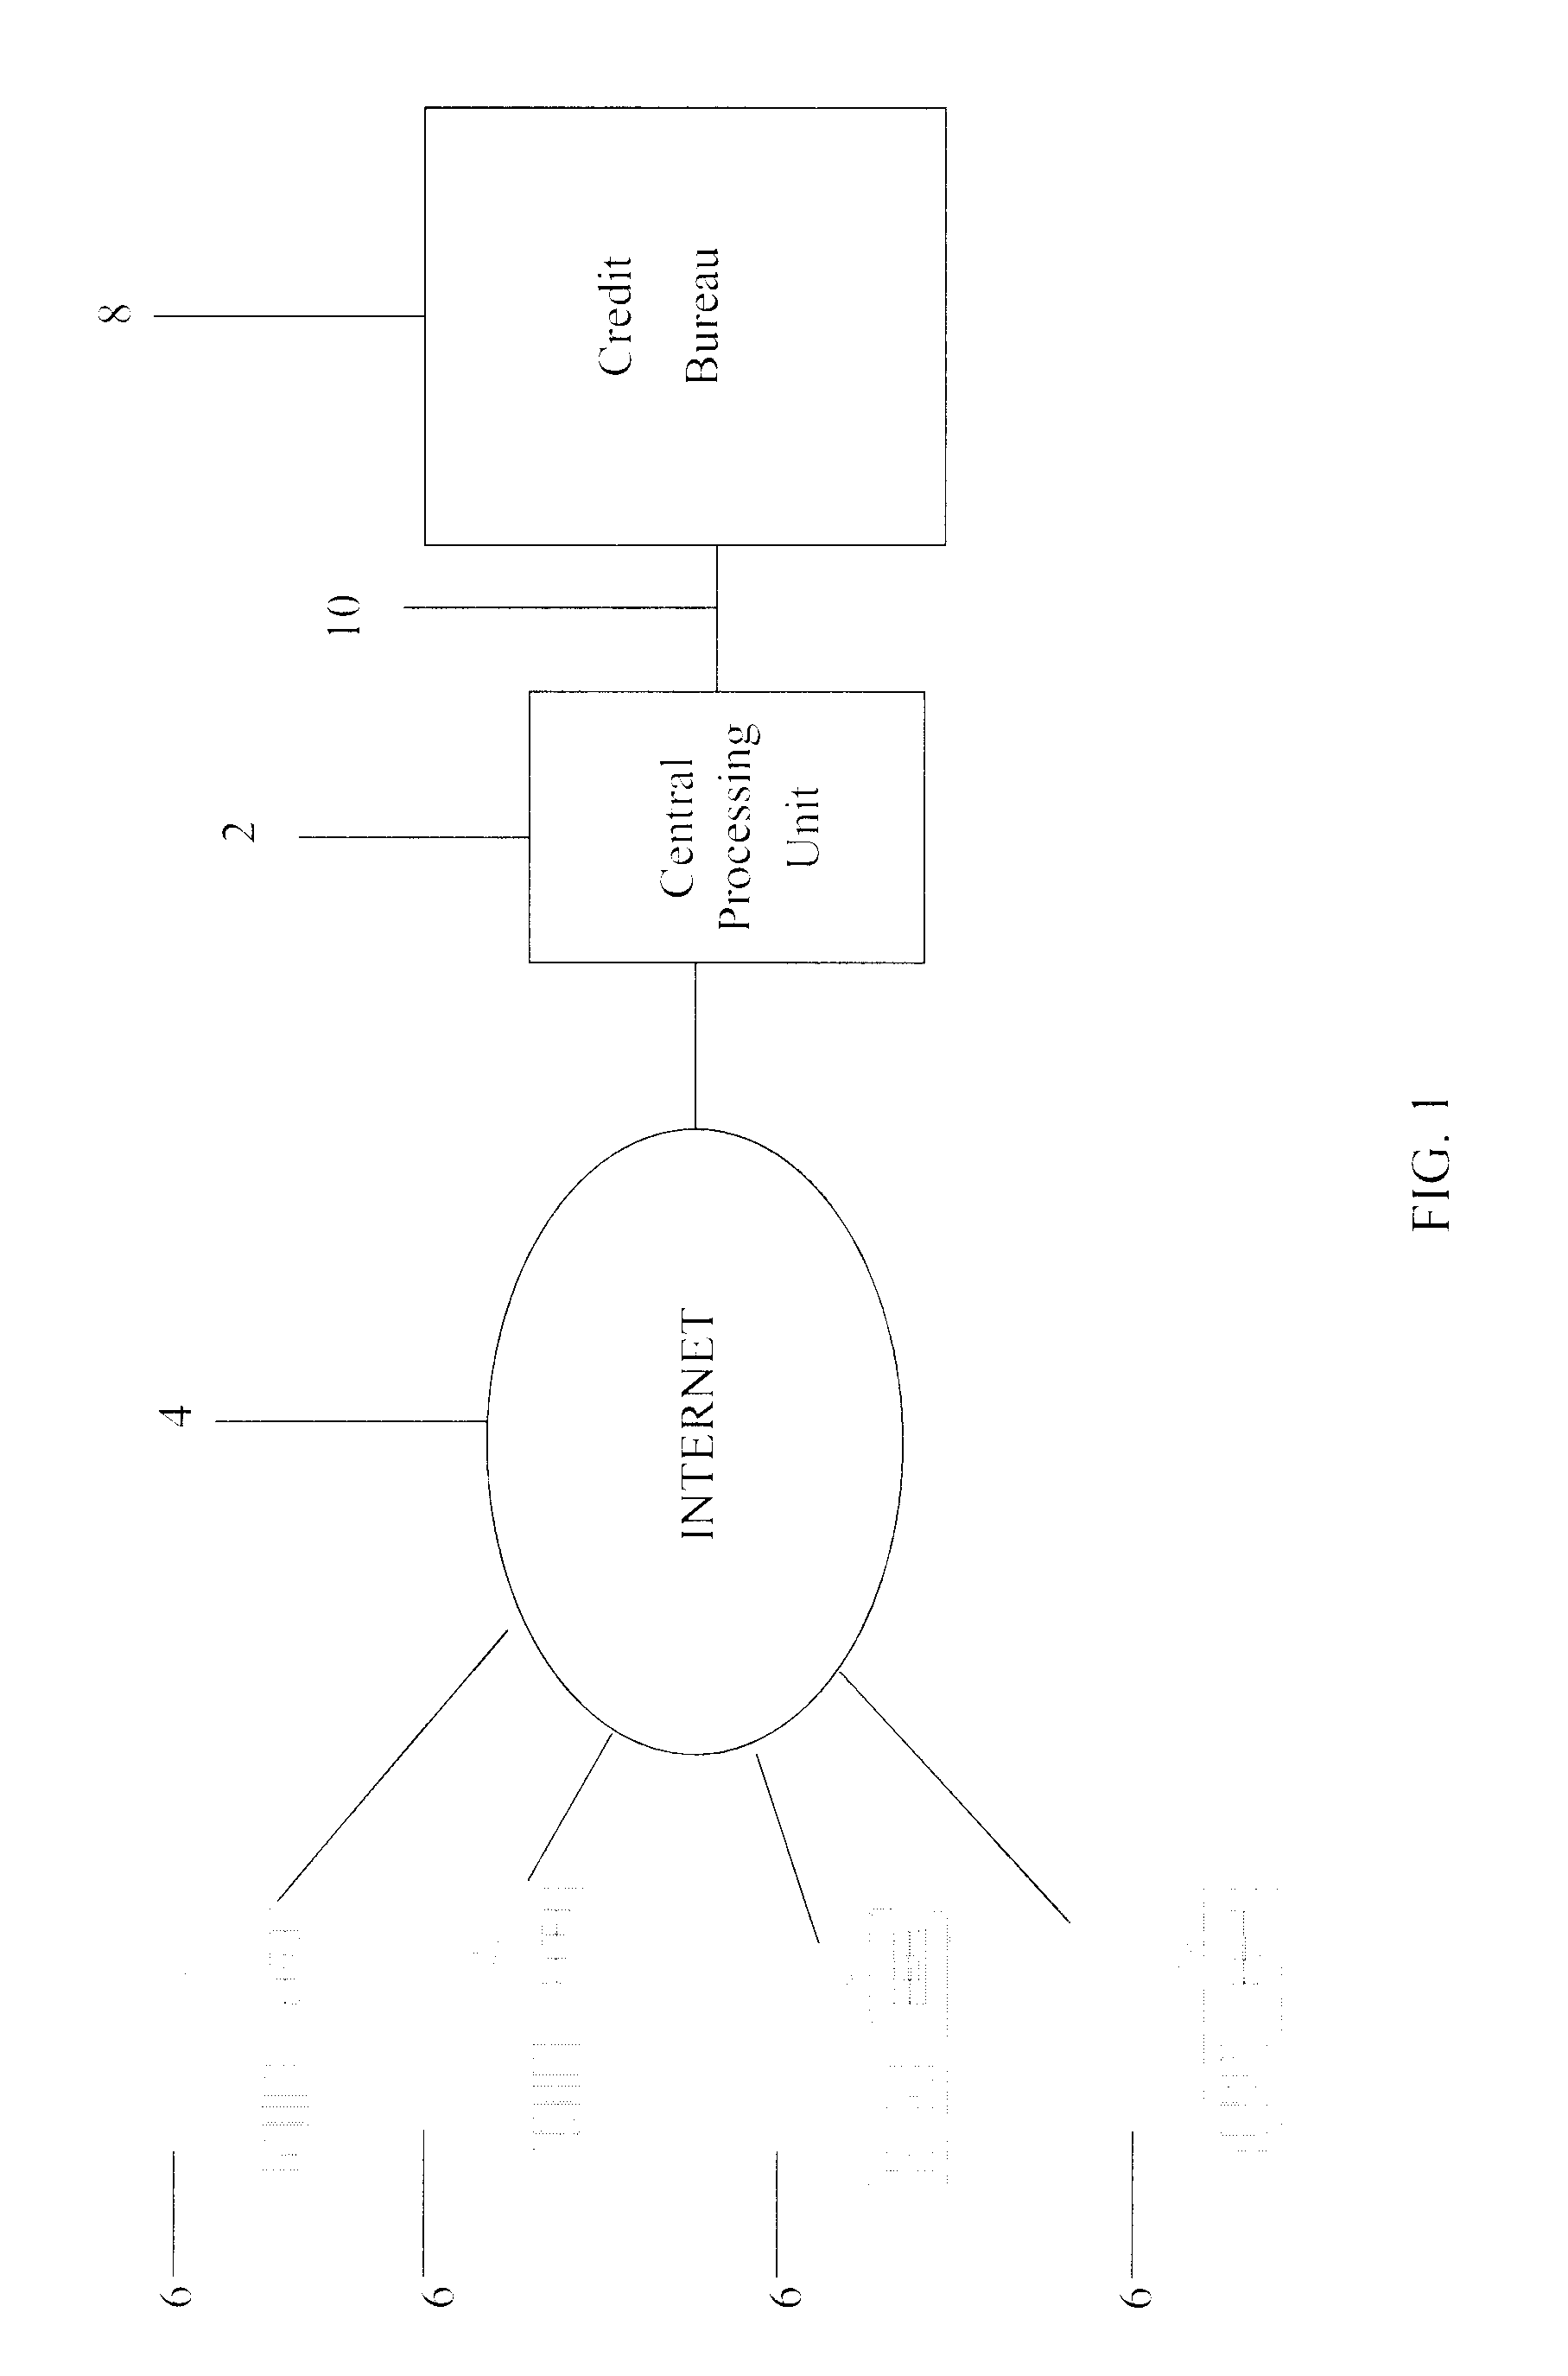 System and method for real-time inquiry, delivery, and reporting of credit information